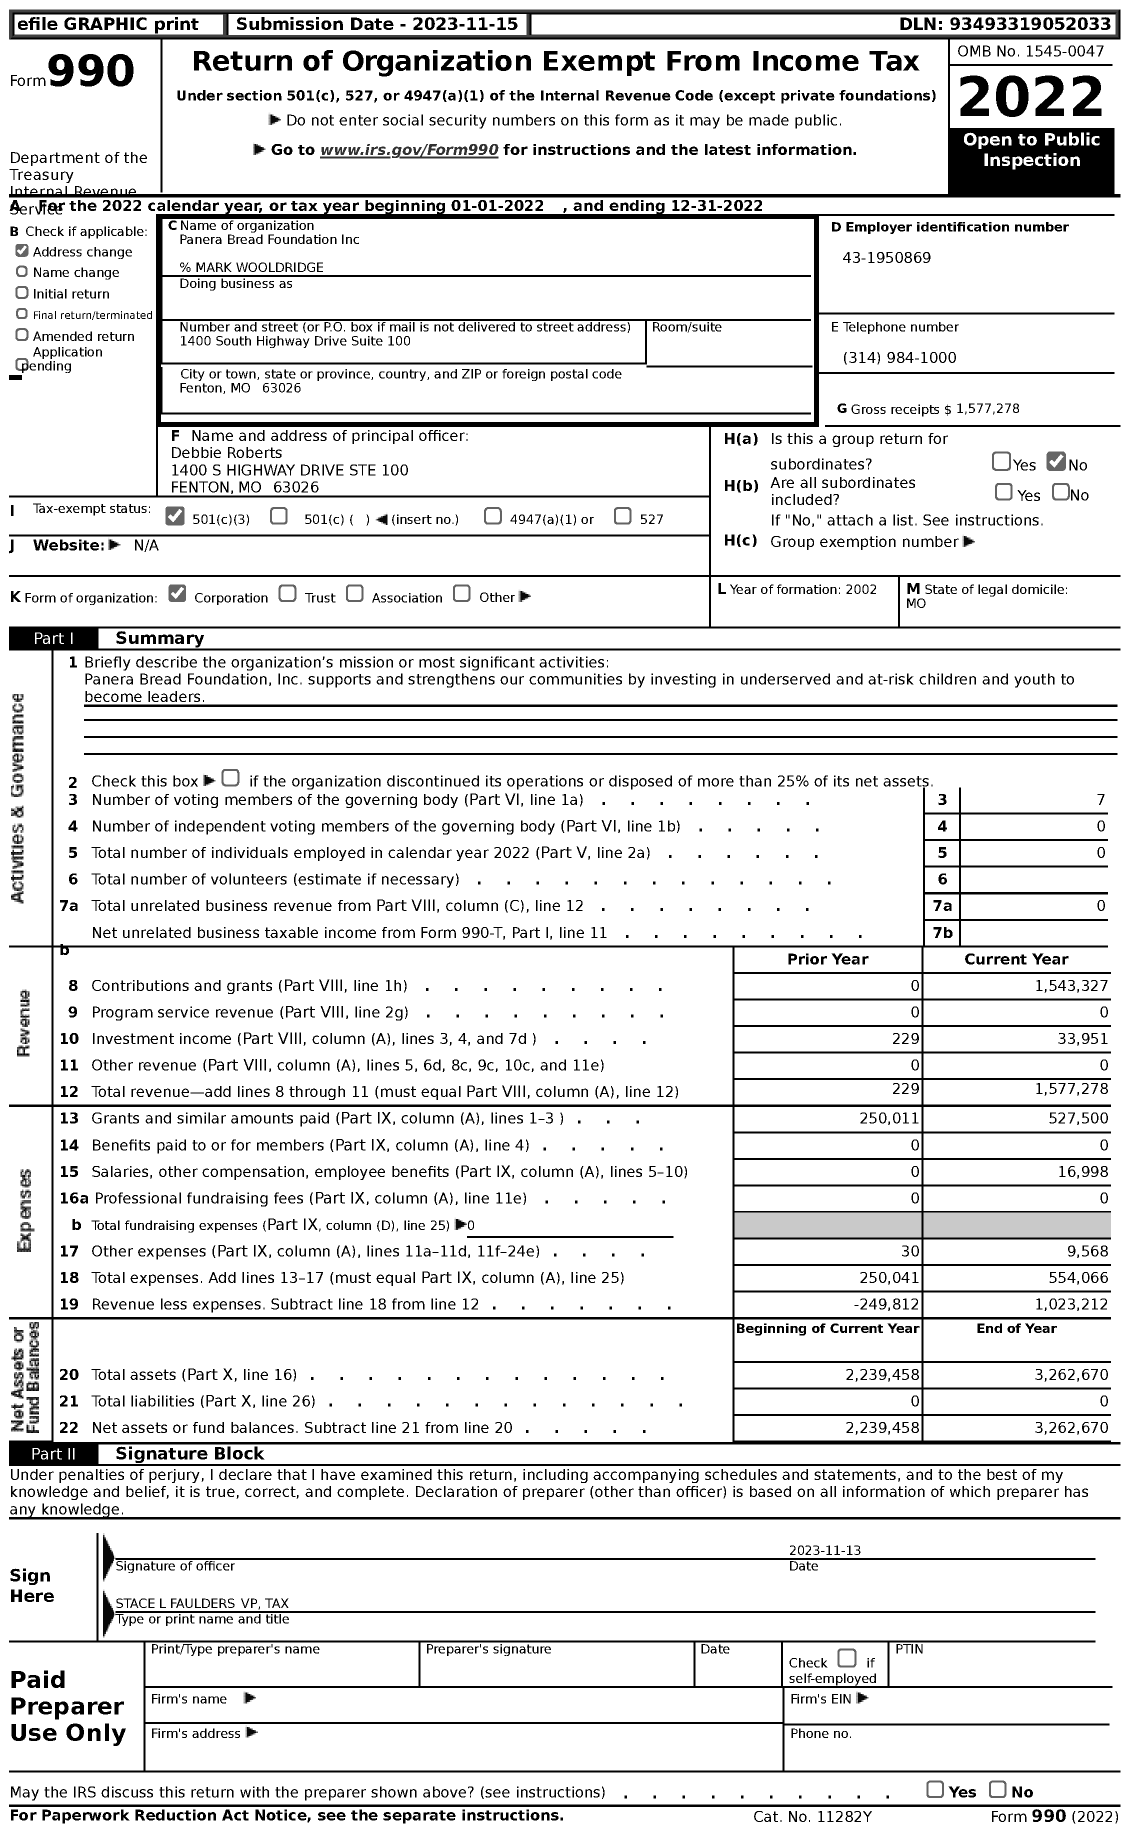 Image of first page of 2022 Form 990 for Panera Bread Foundation